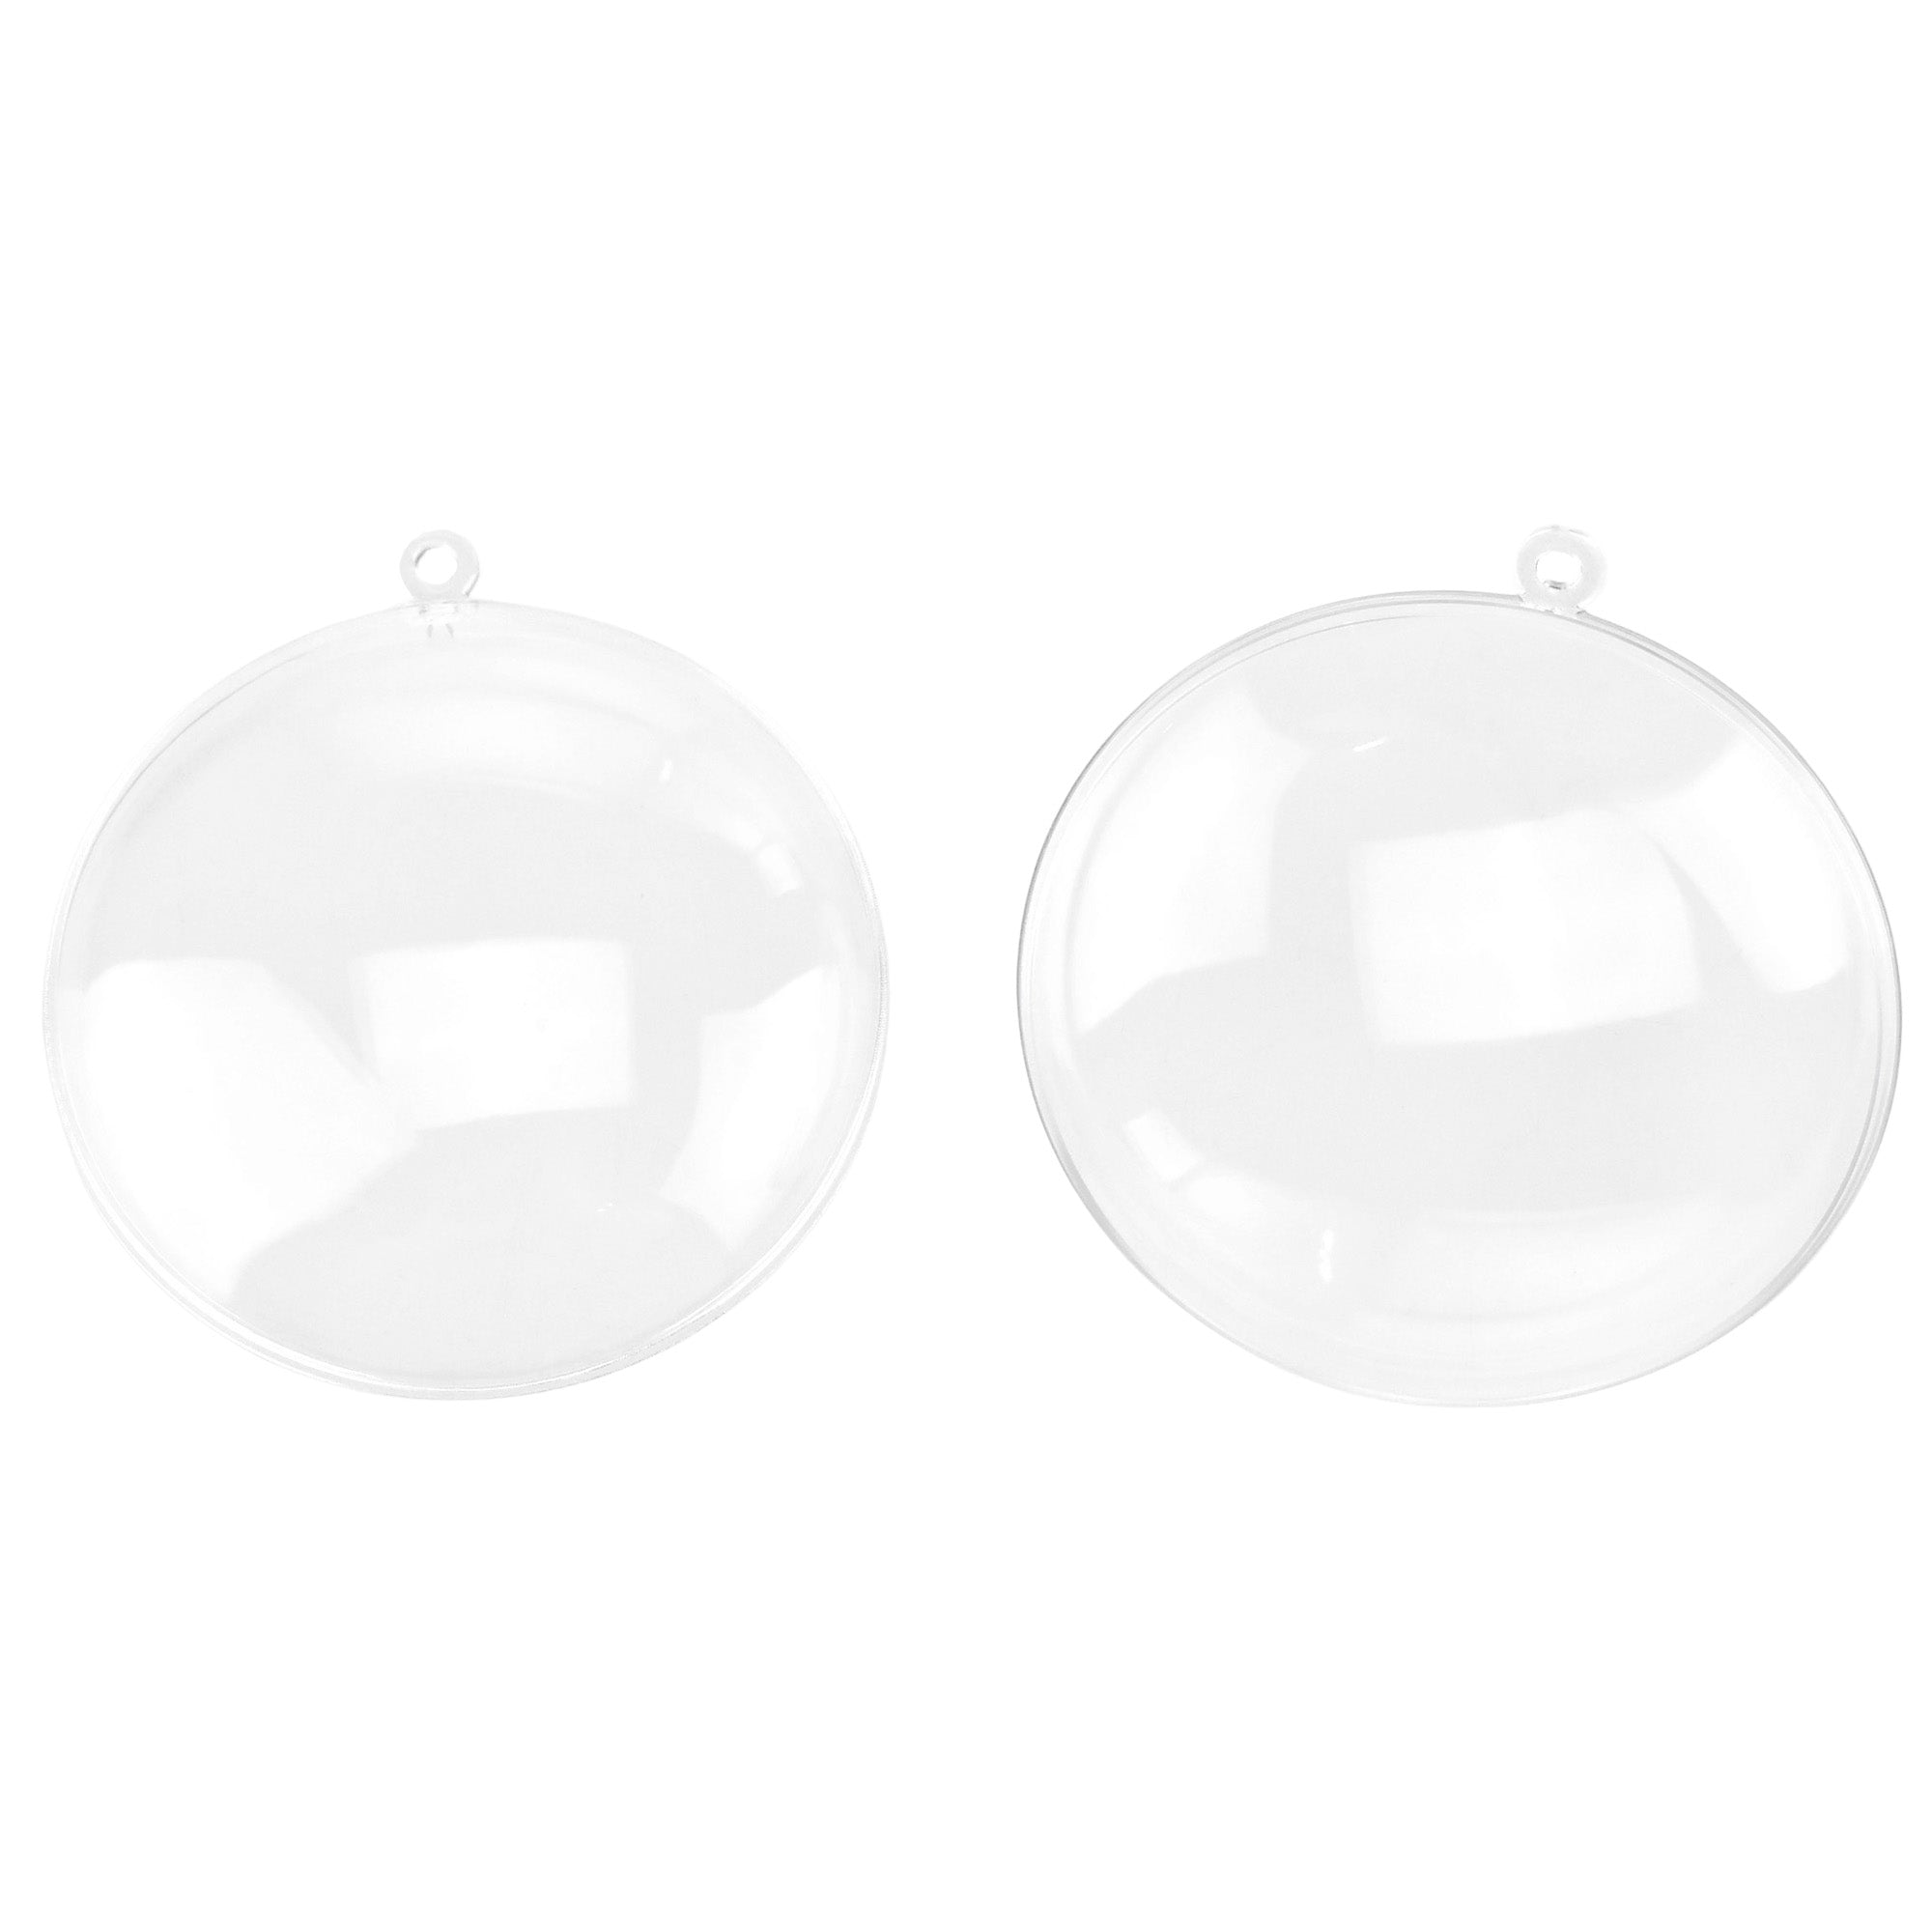 Clear Oval Ball Ornament: 83MM [2610-63] 